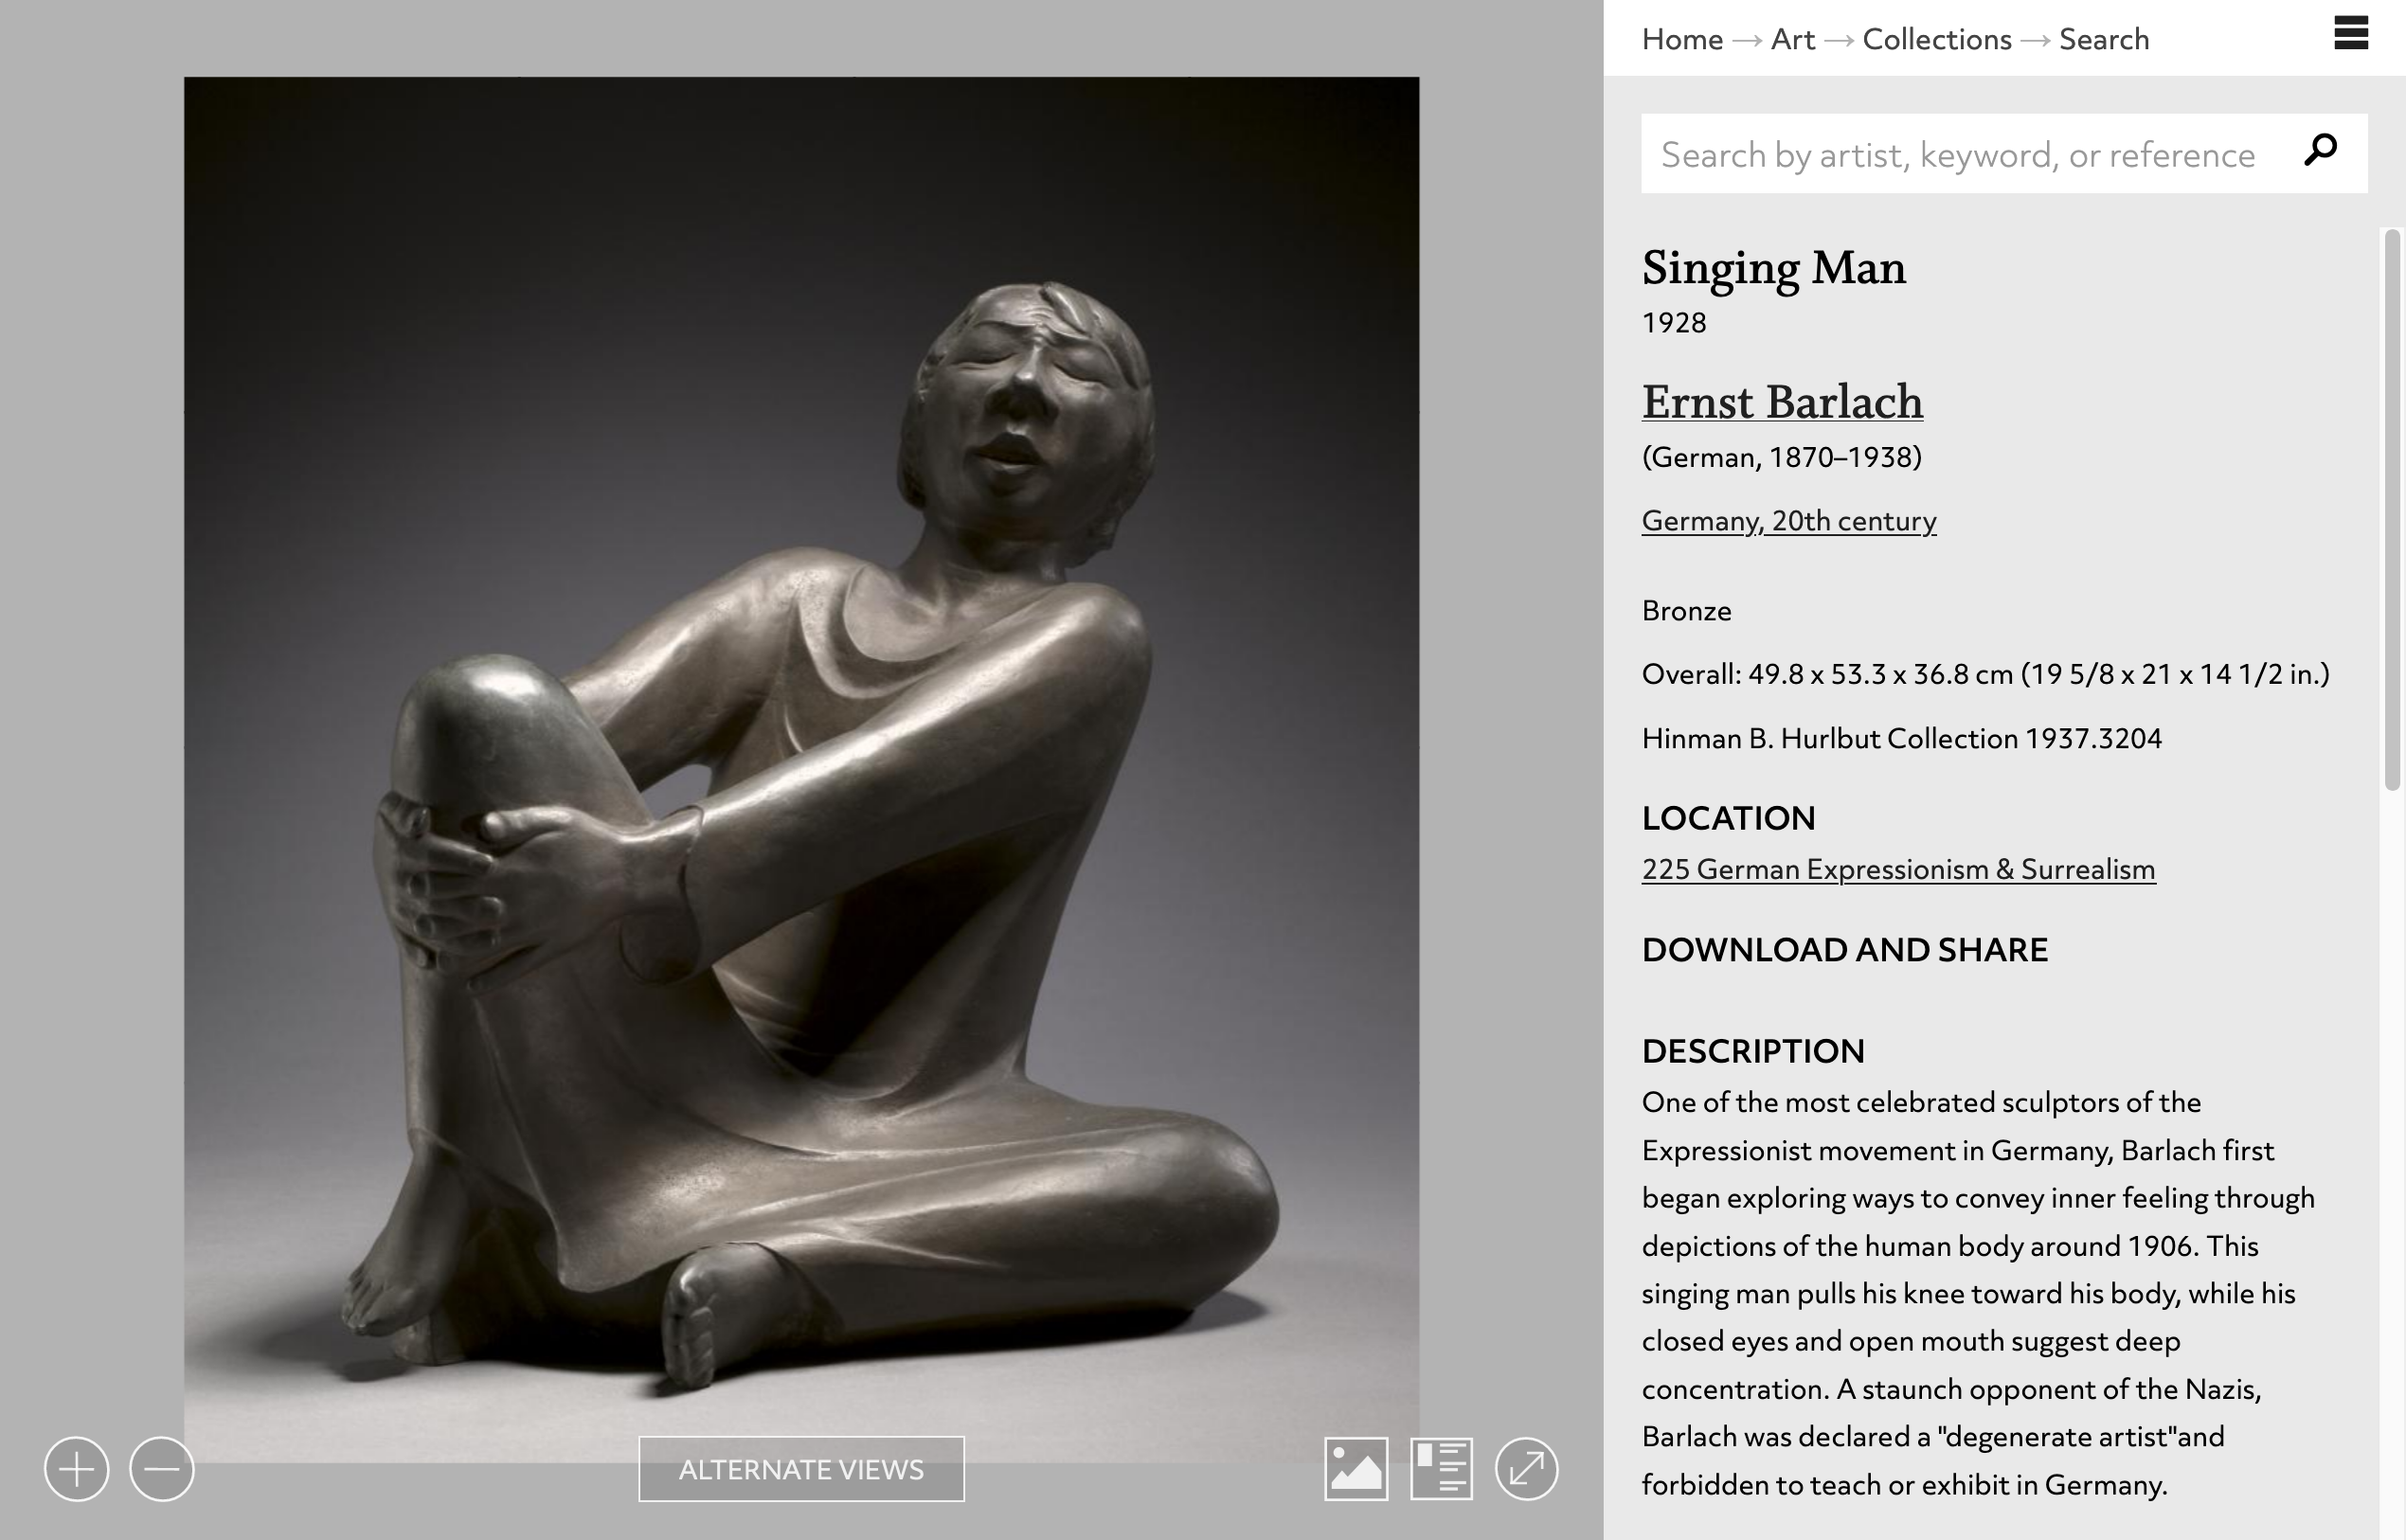 The sculpture Singing Man by Ernst Barlach at the Cleveland Museum of Art's website